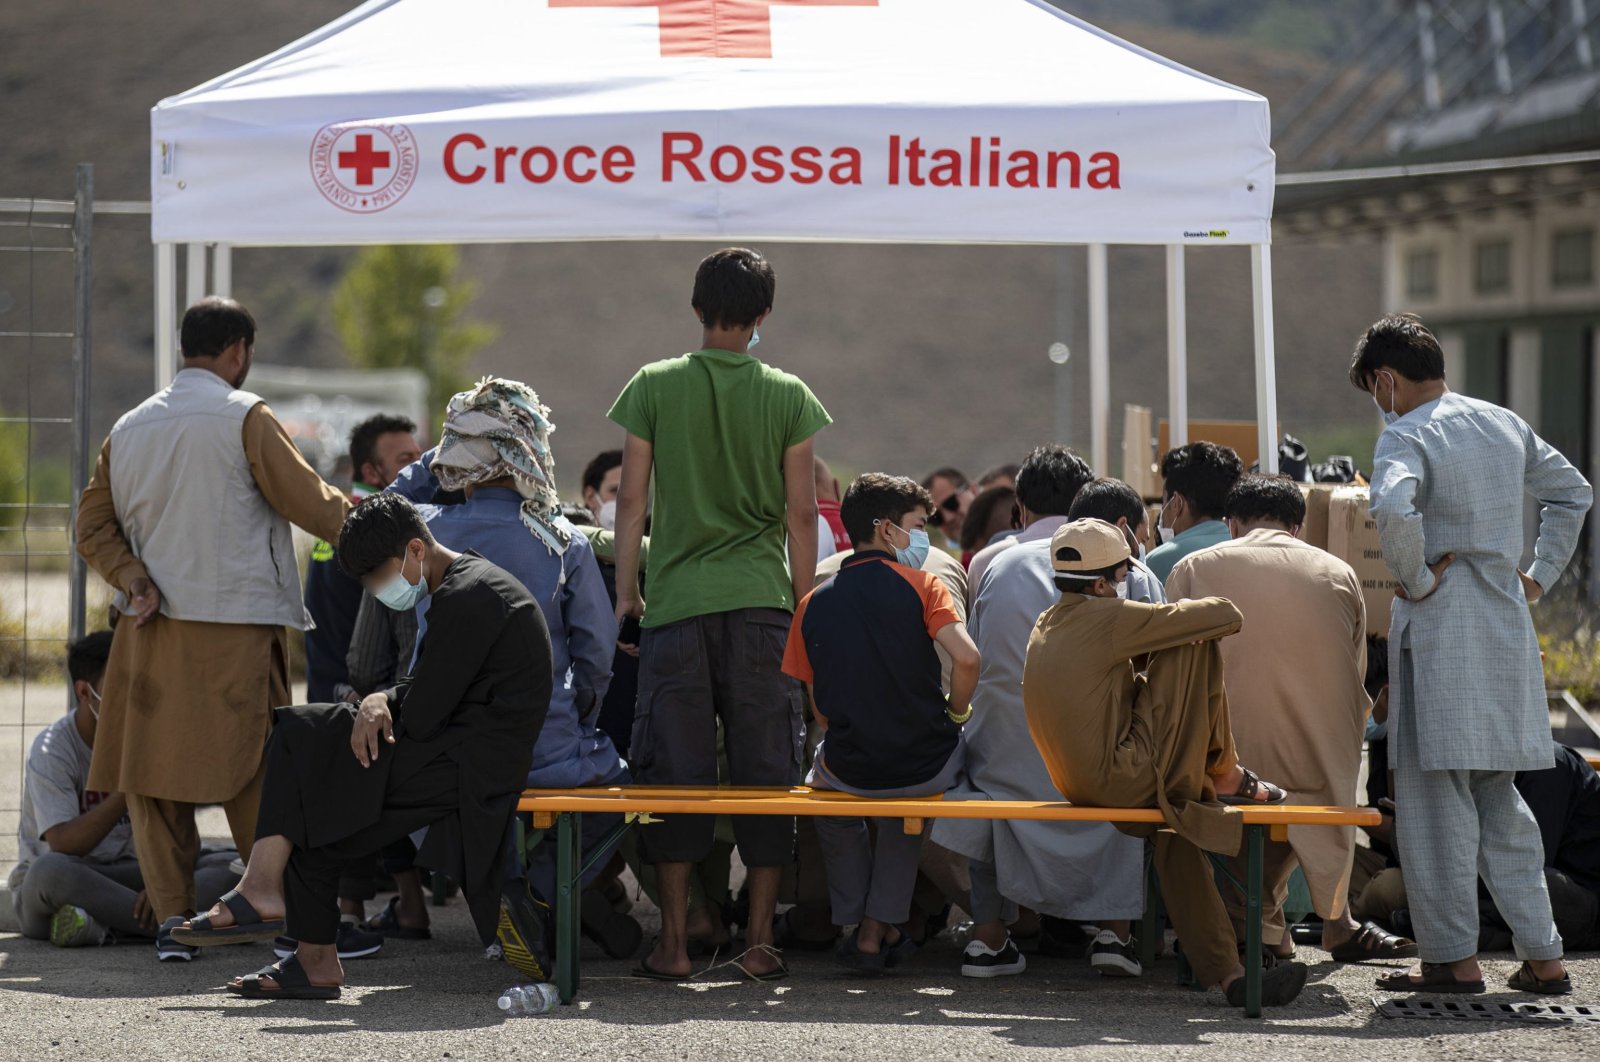 The reception center for Afghan refugees organized by the Italian Red Cross in Avezzano, Italy, Sept. 1, 2021. (EPA Photo)